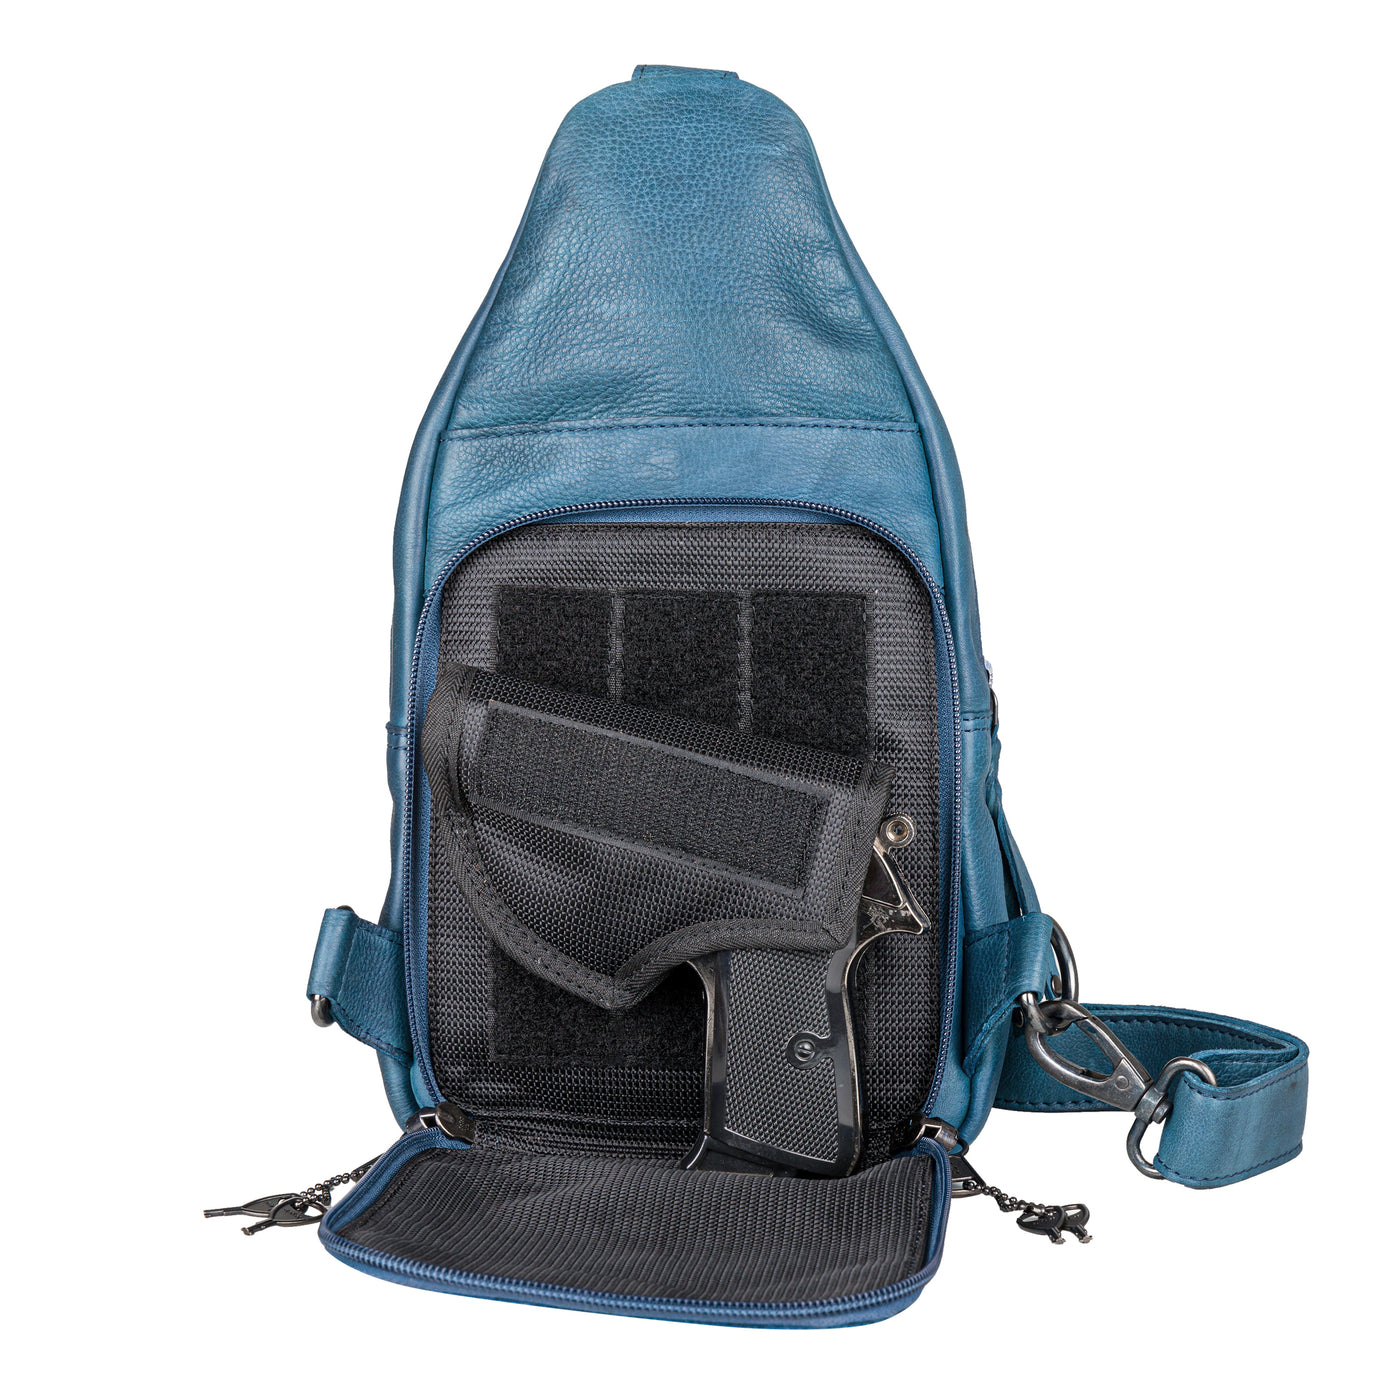 Taylor Sling Concealed Carry Backpack has Multiple Uses for Everyday Tasks  - Pistol Packn' Mama